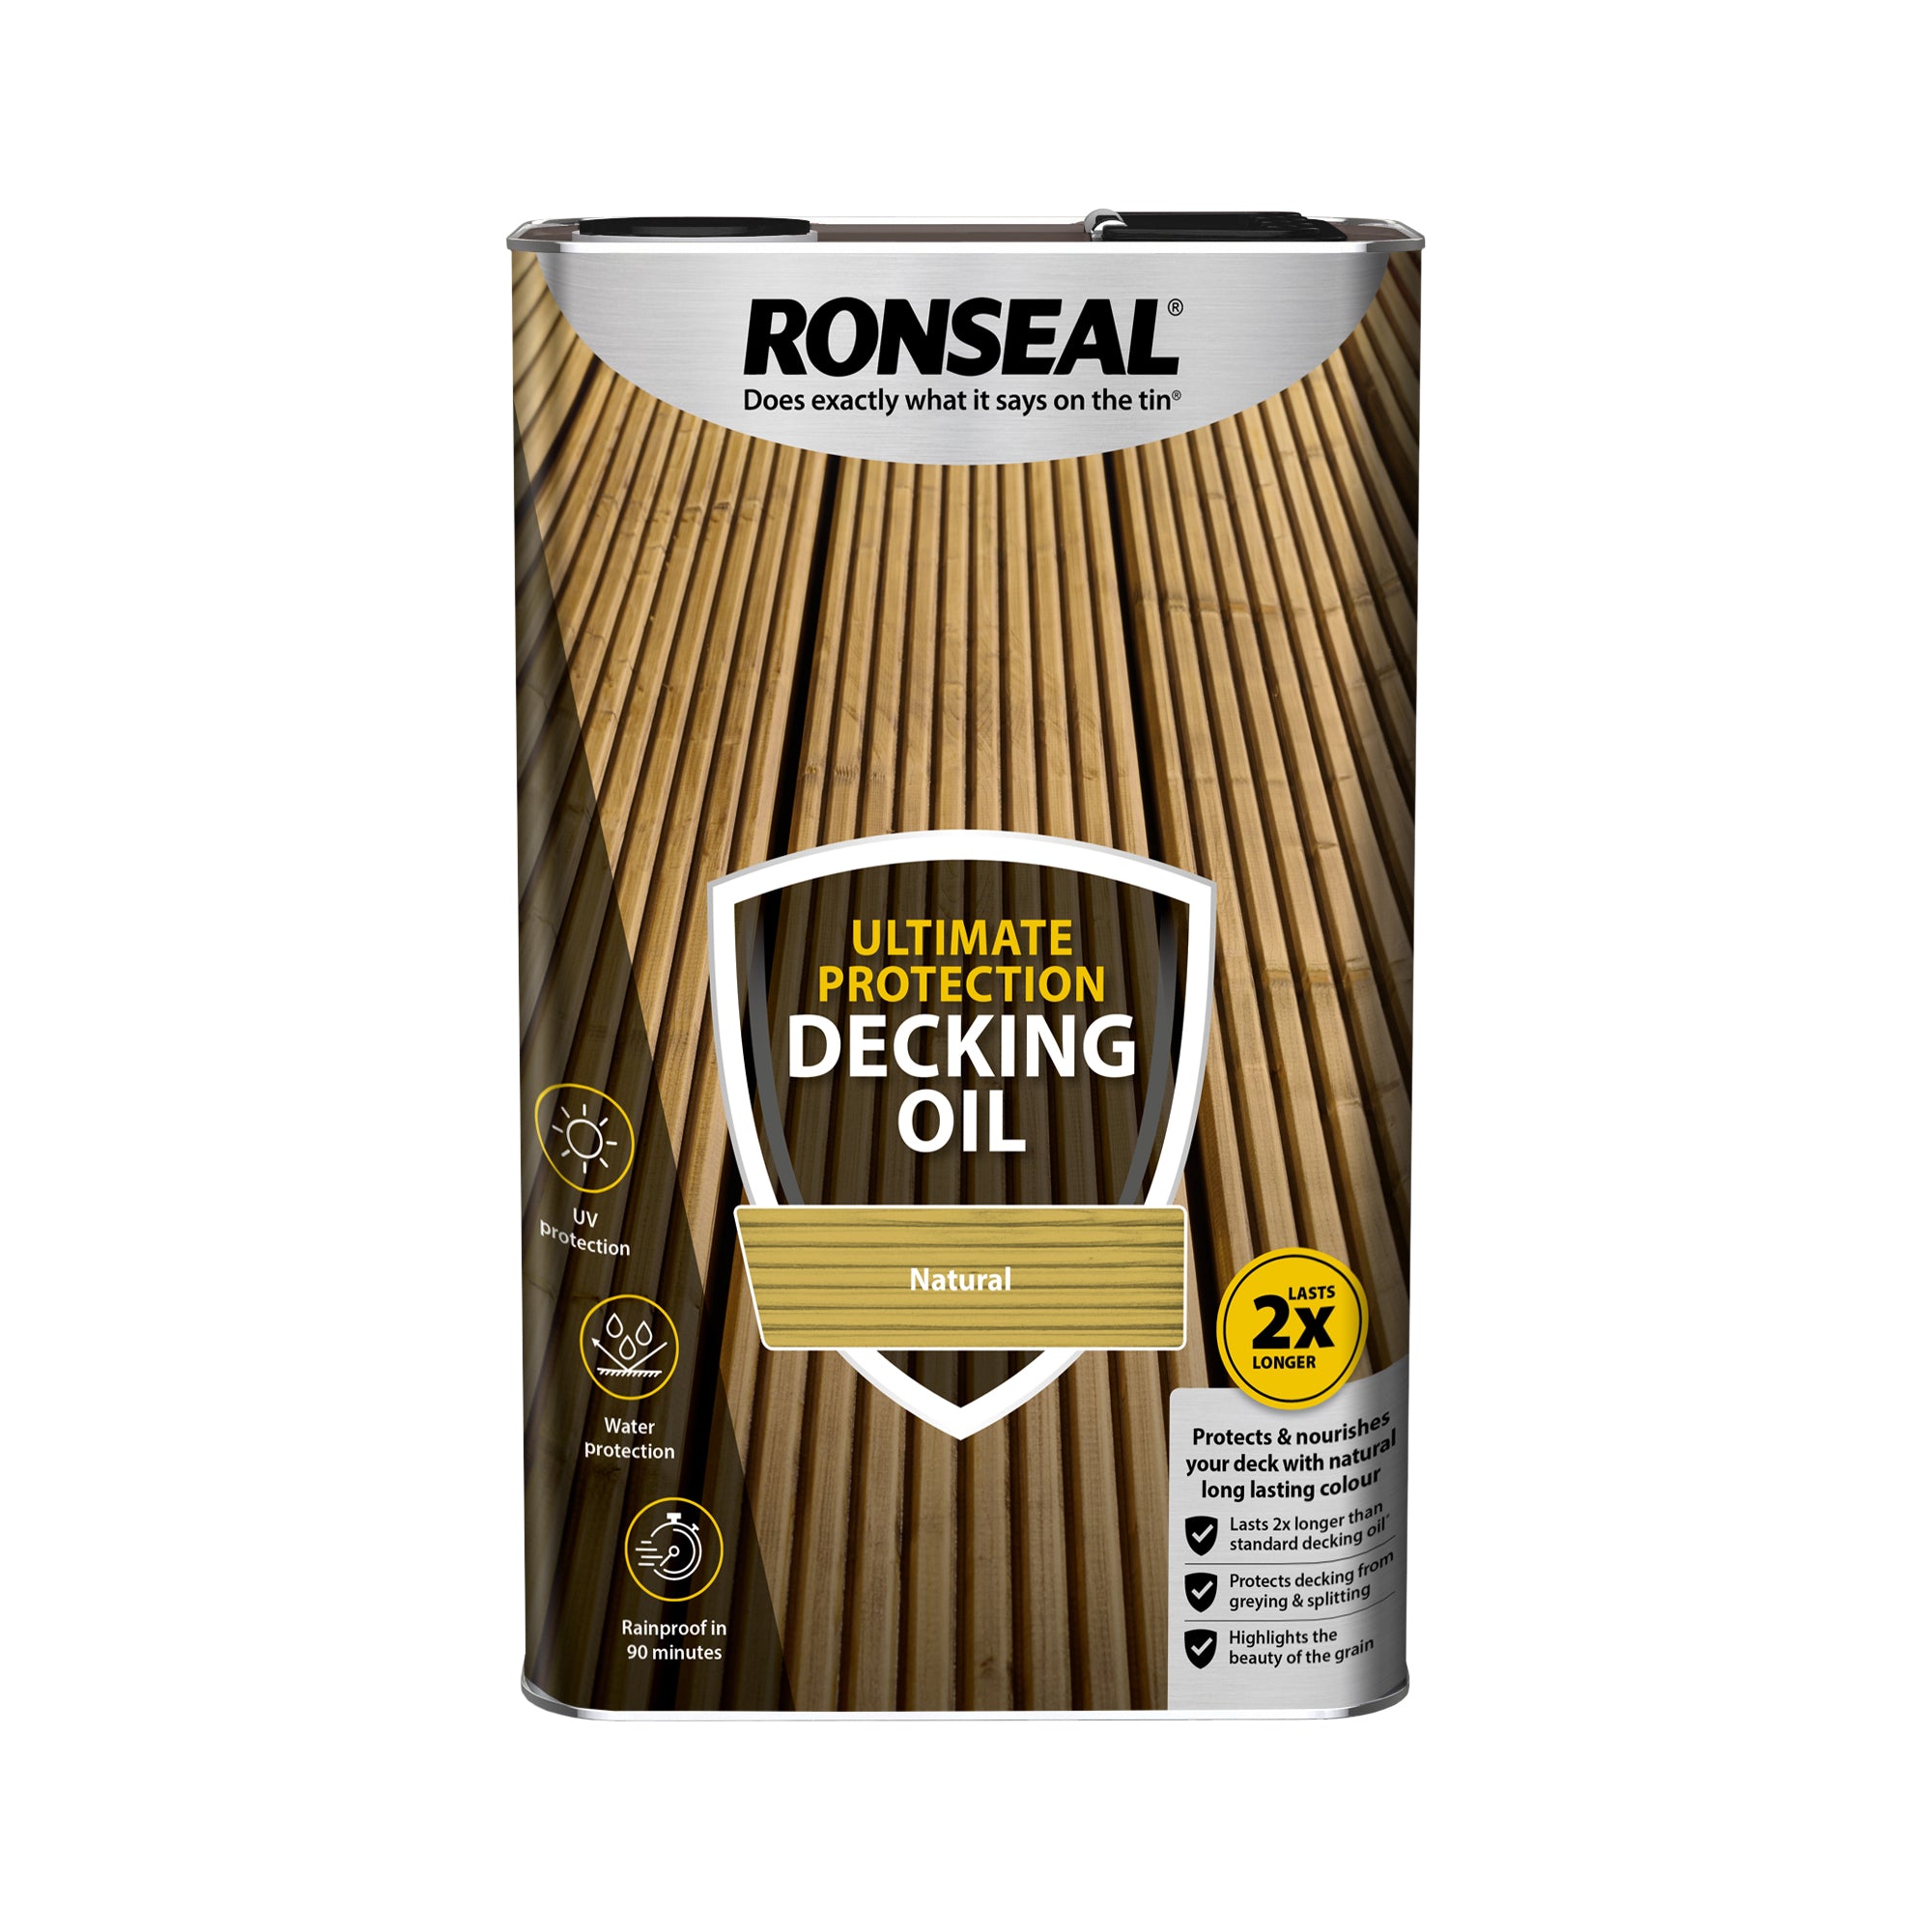 Ronseal-Ultimate-Protection-Decking-Oil-Natural-5L